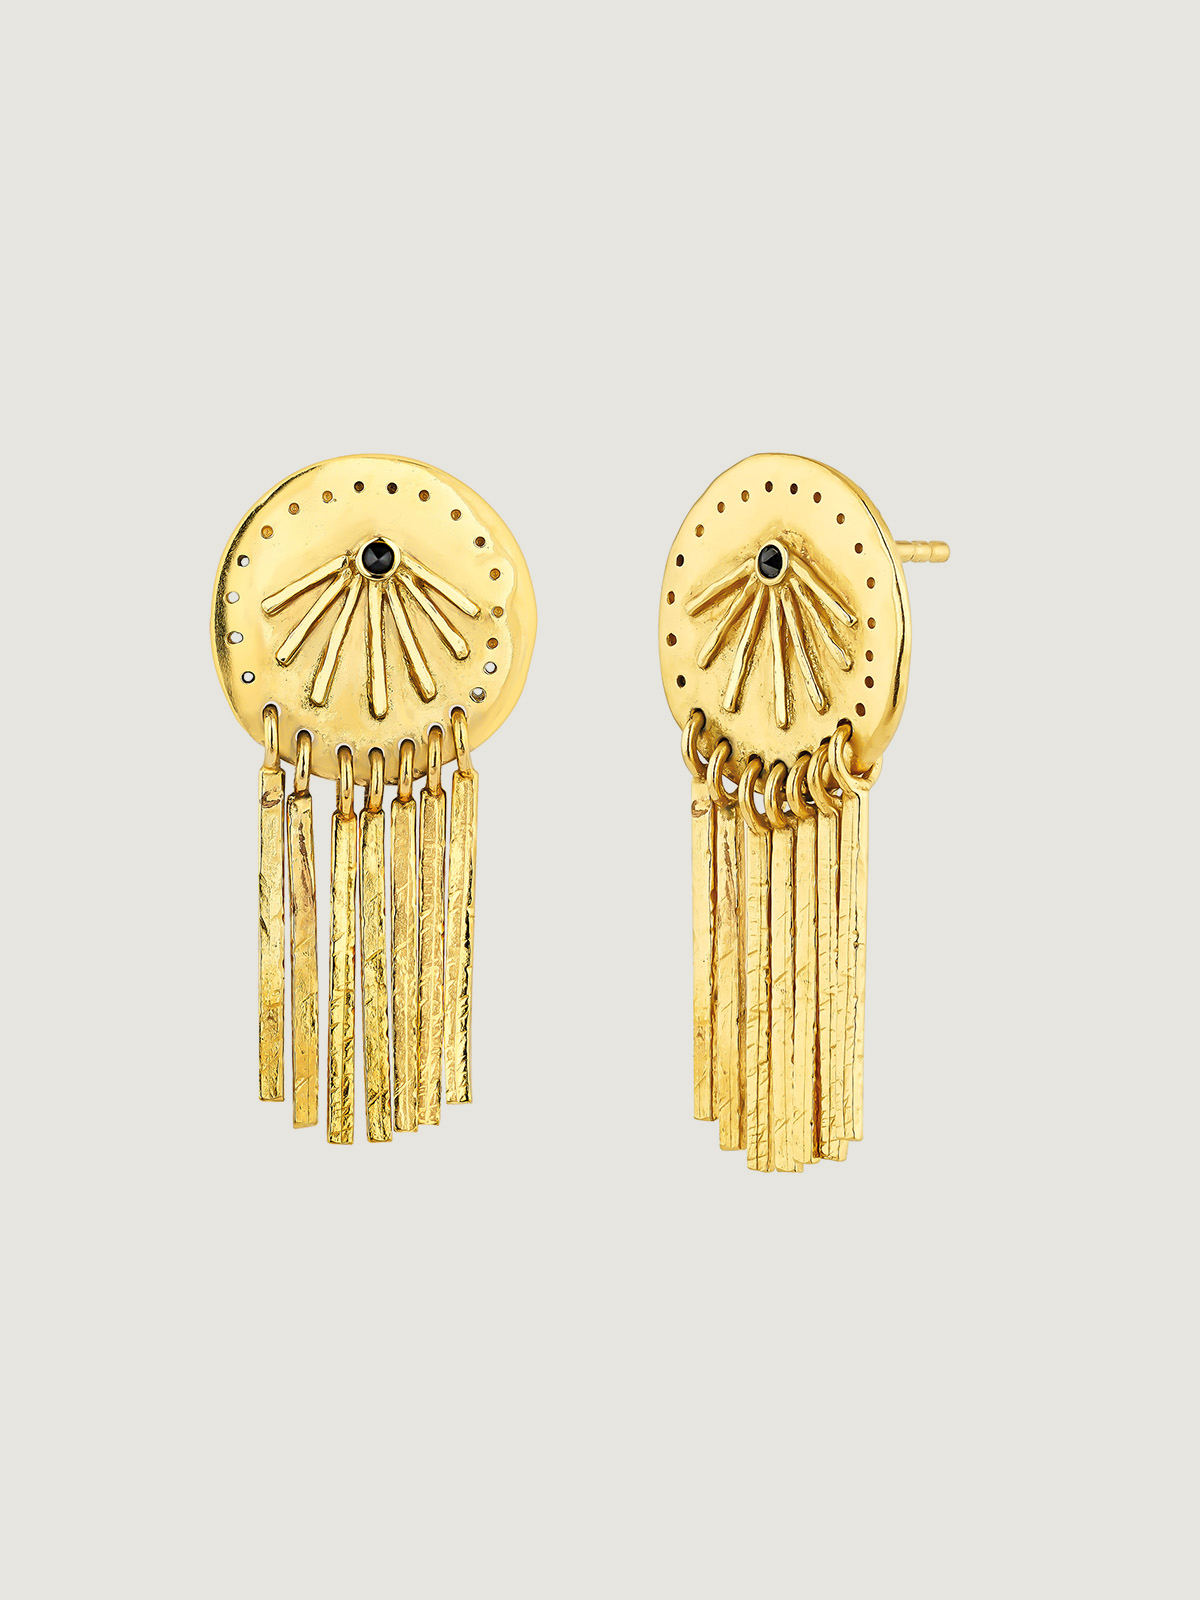 925 Silver earrings bathed in 18K yellow gold with black spinels and ethnic motifs.